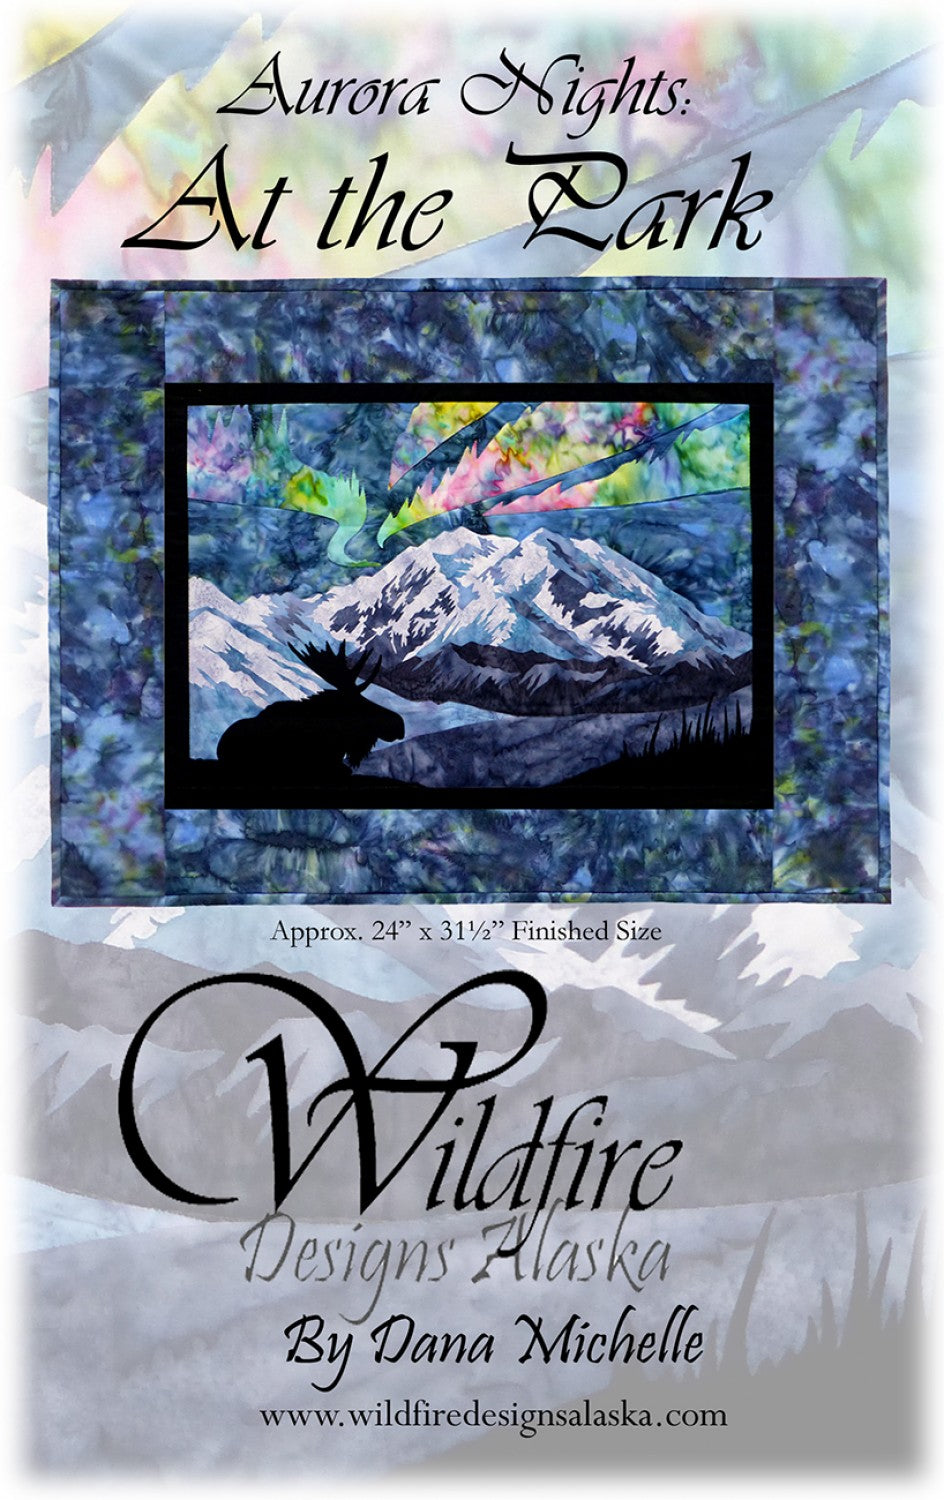 Wildfire Designs Alaska Aurora Nights At the Park Laser Cut Applique Quilt Kit Front Cover